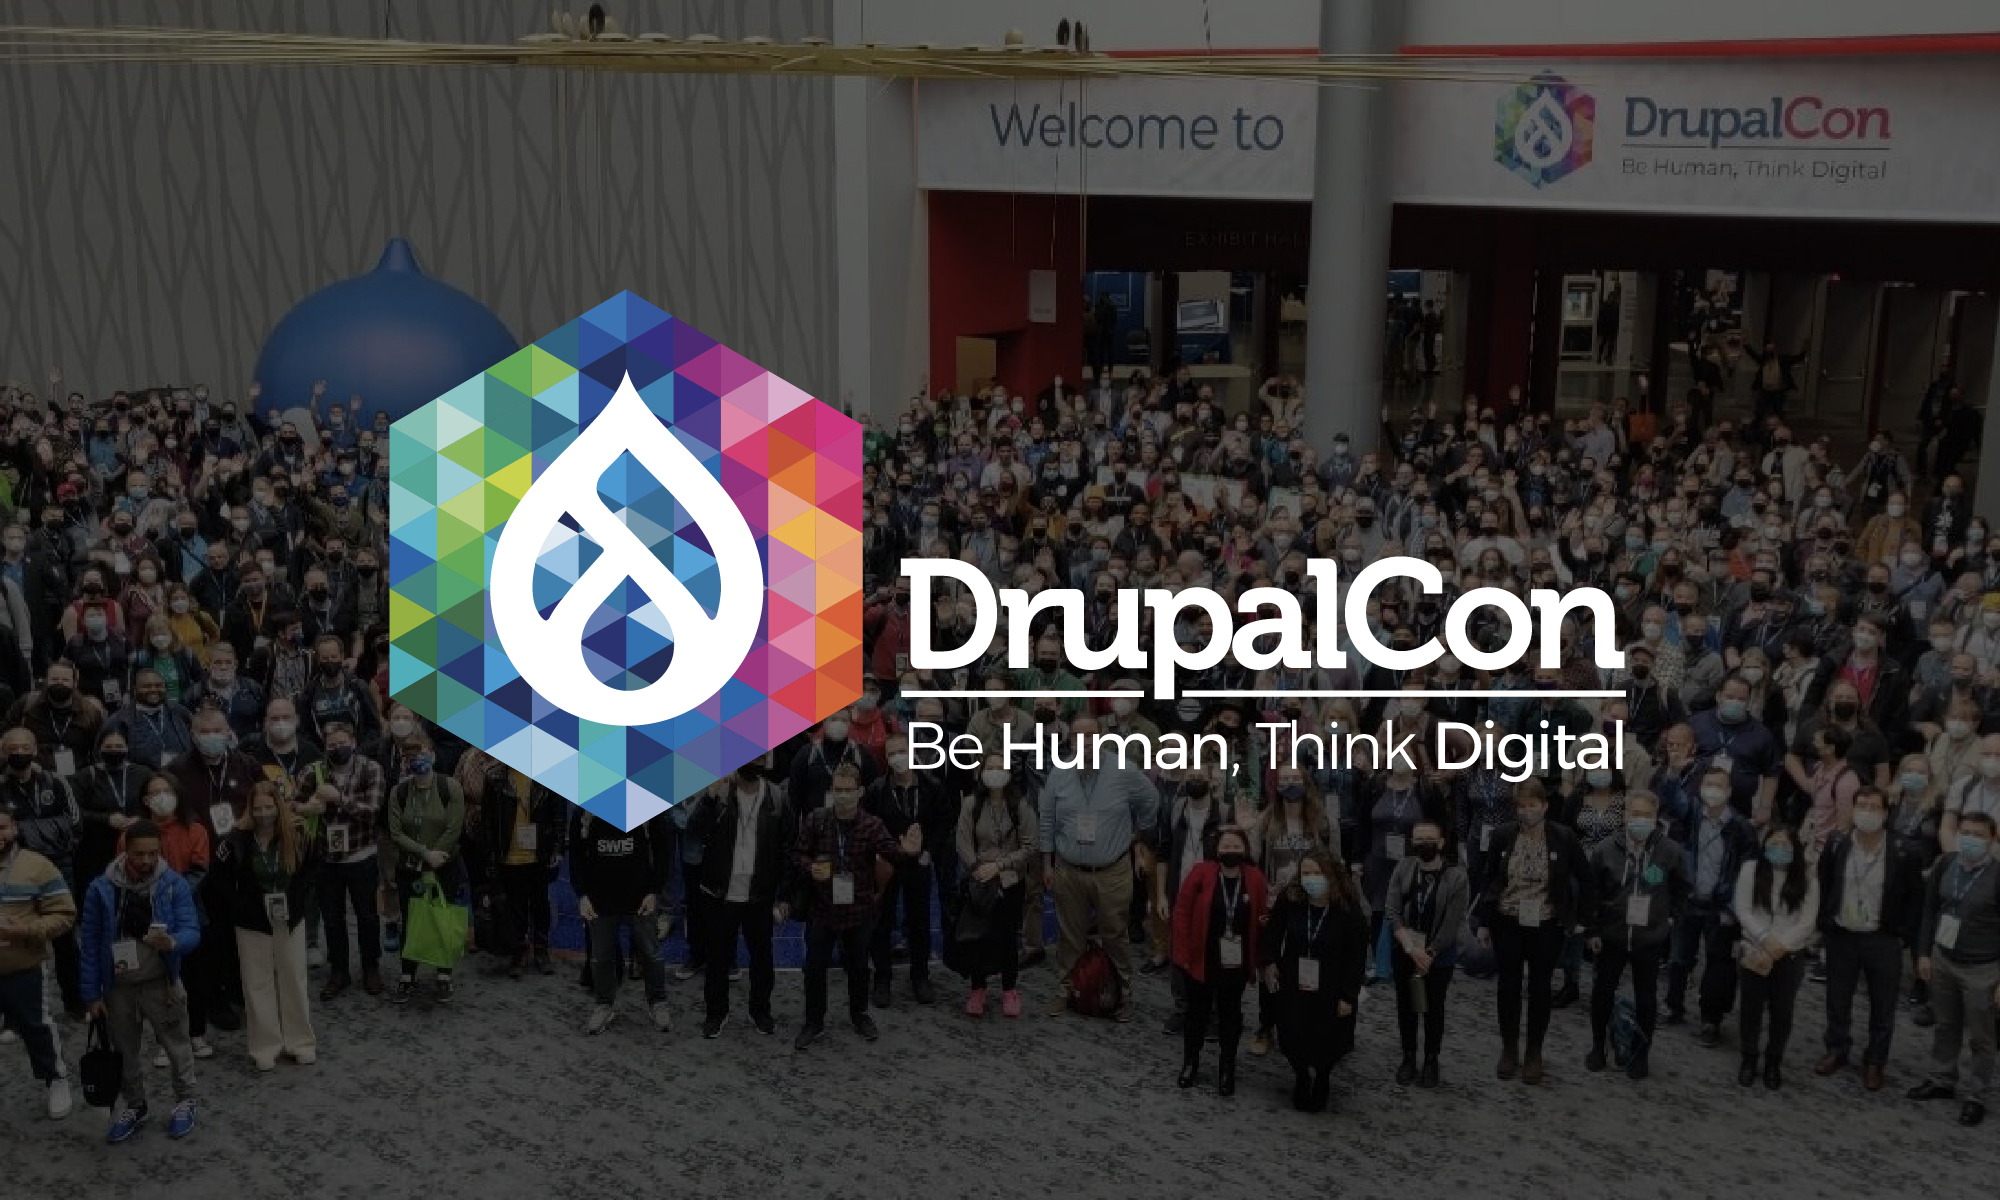 DrupalCon 2022: The Best Place for Drupal Experts